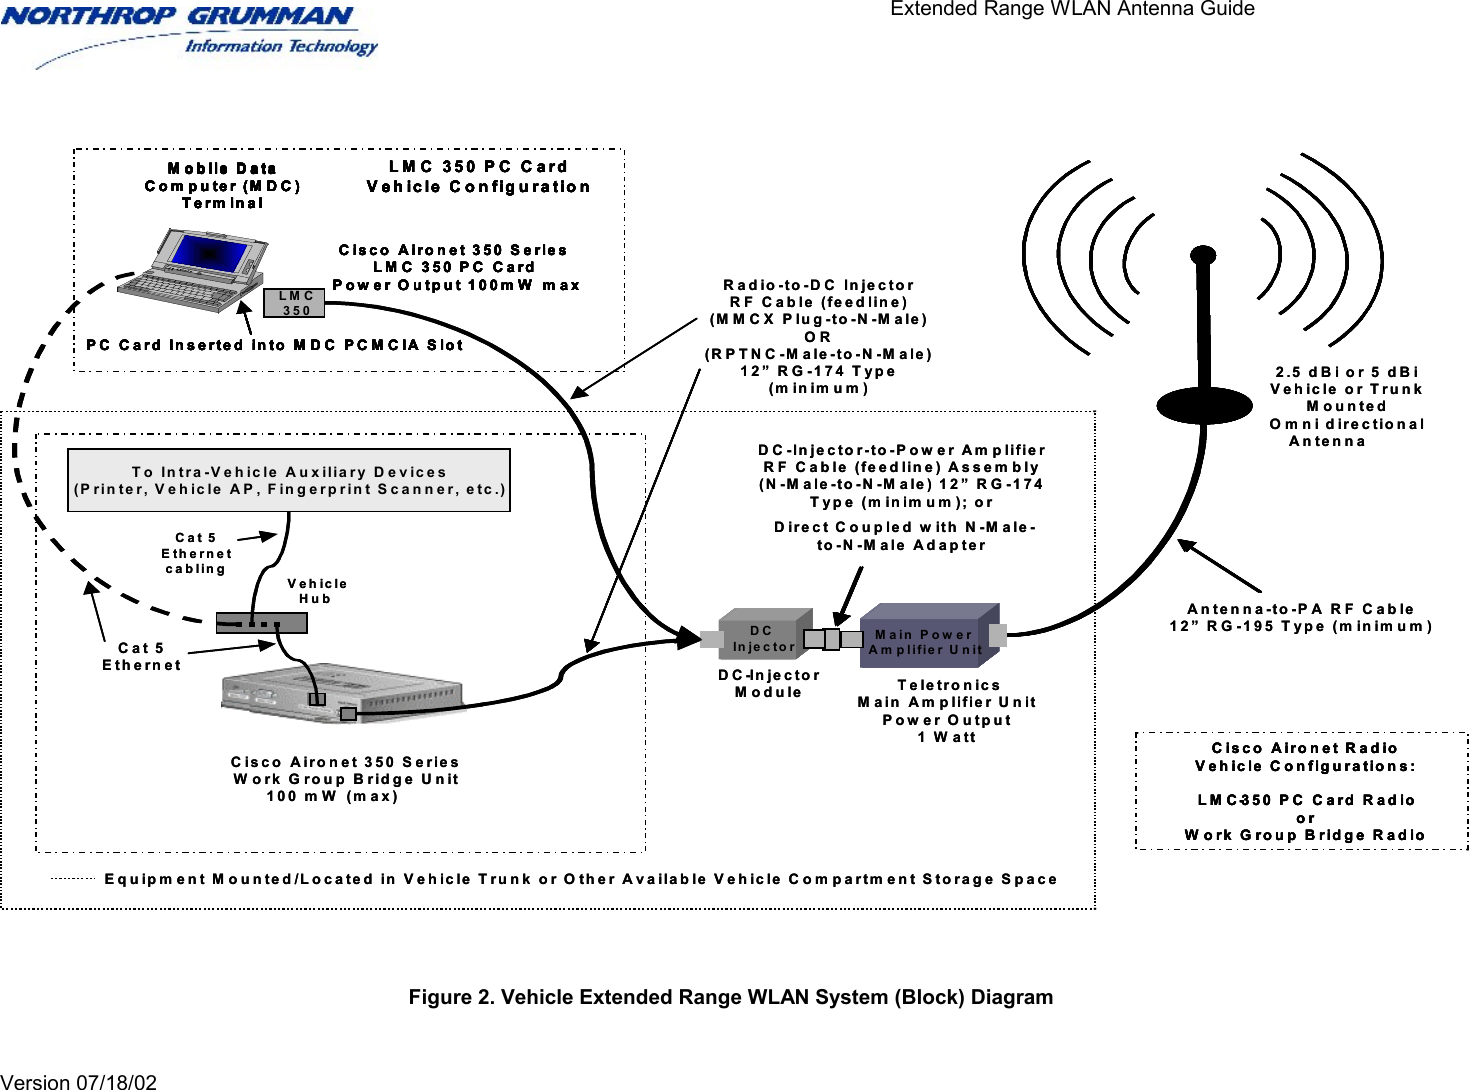                                       Extended Range WLAN Antenna Guide   Version 07/18/02       Figure 2. Vehicle Extended Range WLAN System (Block) Diagram 2.5 dBi or 5 dBiVehicle or TrunkMountedOmni directionalA n te n n a        DC In je c to rDC-Injector ModuleM ain  P ow er A m plifier U nitTo Intra-V e hicle A uxilia ry D e vice s(Printer, Vehicle AP, Fingerprint Scanner, etc.)P C  C ard In s erted  in to  M D C  P C M C IA  S lo tM o b ile D ata  Computer (MDC) TerminalLMC350C isco  Airo n et 3 50  S e ries               LM C  35 0 P C  C a rd             Pow er Output 100m W  maxLM C 350 PC Card Vehicle ConfigurationCisco Aironet Radio Vehicle Configurations:LM C-350 PC Card RadioorW ork Group Bridge RadioRadio-to-DC InjectorRF Cable (feedline)(M M C X  P lug -to-N -M ale)OR(R P TN C -M ale-to -N -M ale)12” RG-174 Type(m in im u m )Equipm ent M ounted/Located in Vehicle Trunk or Other Available Vehicle Compartm ent Storage SpaceTe le tron ic sM ain  Am plifie r U n itPower Output1 W attDC In je c to rM ain  P ow er A m plifier U nitAn ten n a-to-P A  R F  C ab le12” R G -195  T yp e (m inim u m )DC In je c to rM ain  P ow er A m plifier U nitCat 5 Ethernet To Intra-V e hicle A uxilia ry D e vice s(Printer, Vehicle AP, Fingerprint Scanner, etc.)Cisco Aironet 350 SeriesW ork Group Bridge Unit100 mW  (m ax)     To  Intra -V e hicle A u x ilia ry D e vices(Printer, Vehicle AP, Fingerprint Scanner, etc.)VehicleHub P C  C ard In s erted  in to  M D C  P C M C IA  S lo tM o b ile D ata  Computer (MDC) TerminalLMC350C isco  Airo n et 3 50  S e ries               LM C  35 0 P C  C a rd             Pow er Output 100m W  maxLM C 350 PC Card Vehicle ConfigurationP C  C ard In s erted  in to  M D C  P C M C IA  S lo tM o b ile D ata  Computer (MDC) TerminalM o b ile D ata  Computer (MDC) TerminalLMC350C isco  Airo n et 3 50  S e ries               LM C  35 0 P C  C a rd             Pow er Output 100m W  maxLM C 350 PC Card Vehicle ConfigurationCisco Aironet Radio Vehicle Configurations:LM C-350 PC Card RadioorW ork Group Bridge RadioD C -In jecto r-to -P ow e r Am plifie r RF Cable (feedline) Assem bly (N -M ale -to -N -M ale) 12” R G -174 T ype  (m inim um ); o rDirect Coupled with N-Male-to-N -M ale AdapterCat 5 Ethernet c a blin g2.5 dBi or 5 dBiVehicle or TrunkMountedOmni directionalA n te n n a        DC In je c to rDC-Injector ModuleM ain  P ow er A m plifier U nitTo Intra-V e hicle A uxilia ry D e vice s(Printer, Vehicle AP, Fingerprint Scanner, etc.)P C  C ard In s erted  in to  M D C  P C M C IA  S lo tM o b ile D ata  Computer (MDC) TerminalLMC350C isco  Airo n et 3 50  S e ries               LM C  35 0 P C  C a rd             Pow er Output 100m W  maxLM C 350 PC Card Vehicle ConfigurationP C  C ard In s erted  in to  M D C  P C M C IA  S lo tM o b ile D ata  Computer (MDC) TerminalM o b ile D ata  Computer (MDC) TerminalLMC350C isco  Airo n et 3 50  S e ries               LM C  35 0 P C  C a rd             Pow er Output 100m W  maxLM C 350 PC Card Vehicle ConfigurationCisco Aironet Radio Vehicle Configurations:LM C-350 PC Card RadioorW ork Group Bridge RadioRadio-to-DC InjectorRF Cable (feedline)(M M C X  P lug -to-N -M ale)OR(R P TN C -M ale-to -N -M ale)12” RG-174 Type(m in im u m )Equipm ent M ounted/Located in Vehicle Trunk or Other Available Vehicle Compartm ent Storage SpaceTe le tron ic sM ain  Am plifie r U n itPower Output1 W attDC In je c to rM ain  P ow er A m plifier U nitAn ten n a-to-P A  R F  C ab le12” R G -195  T yp e (m inim u m )DC In je c to rM ain  P ow er A m plifier U nitCat 5 Ethernet To Intra-V e hicle A uxilia ry D e vice s(Printer, Vehicle AP, Fingerprint Scanner, etc.)Cisco Aironet 350 SeriesW ork Group Bridge Unit100 mW  (m ax)     To  Intra -V e hicle A u x ilia ry D e vices(Printer, Vehicle AP, Fingerprint Scanner, etc.)VehicleHub P C  C ard In s erted  in to  M D C  P C M C IA  S lo tM o b ile D ata  Computer (MDC) TerminalM o b ile D ata  Computer (MDC) TerminalLMC350C isco  Airo n et 3 50  S e ries               LM C  35 0 P C  C a rd             Pow er Output 100m W  maxLM C 350 PC Card Vehicle ConfigurationP C  C ard In s erted  in to  M D C  P C M C IA  S lo tM o b ile D ata  Computer (MDC) TerminalM o b ile D ata  Computer (MDC) TerminalLMC350C isco  Airo n et 3 50  S e ries               LM C  35 0 P C  C a rd             Pow er Output 100m W  maxLM C 350 PC Card Vehicle ConfigurationCisco Aironet Radio Vehicle Configurations:LM C-350 PC Card RadioorW ork Group Bridge RadioD C -In jecto r-to -P ow e r Am plifie r RF Cable (feedline) Assem bly (N -M ale -to -N -M ale) 12” R G -174 T ype  (m inim um ); o rDirect Coupled with N-Male-to-N -M ale AdapterCat 5 Ethernet c a blin g